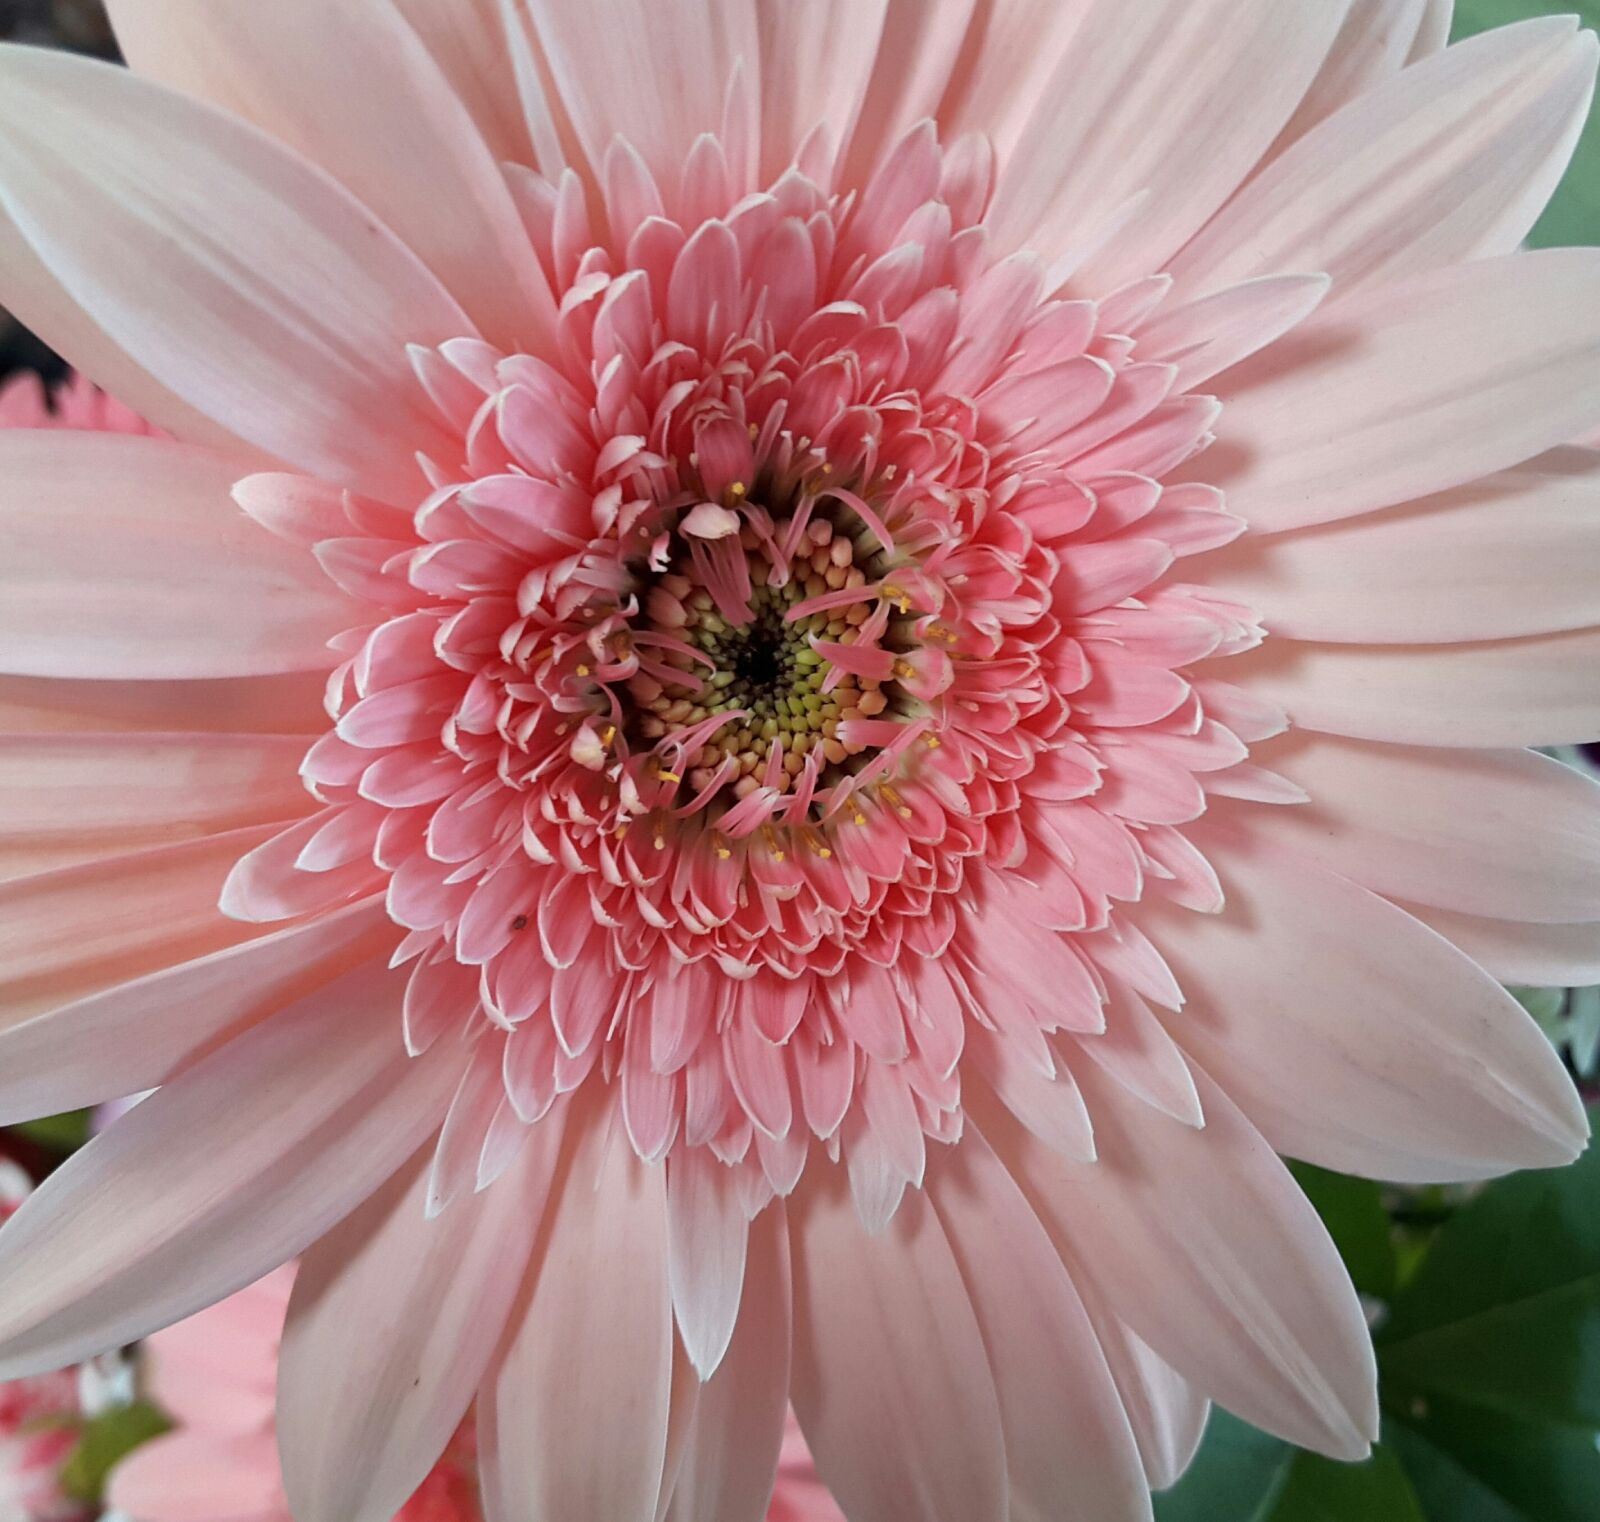 Samsung Galaxy A8 sample photo. Flower, pink, white photography